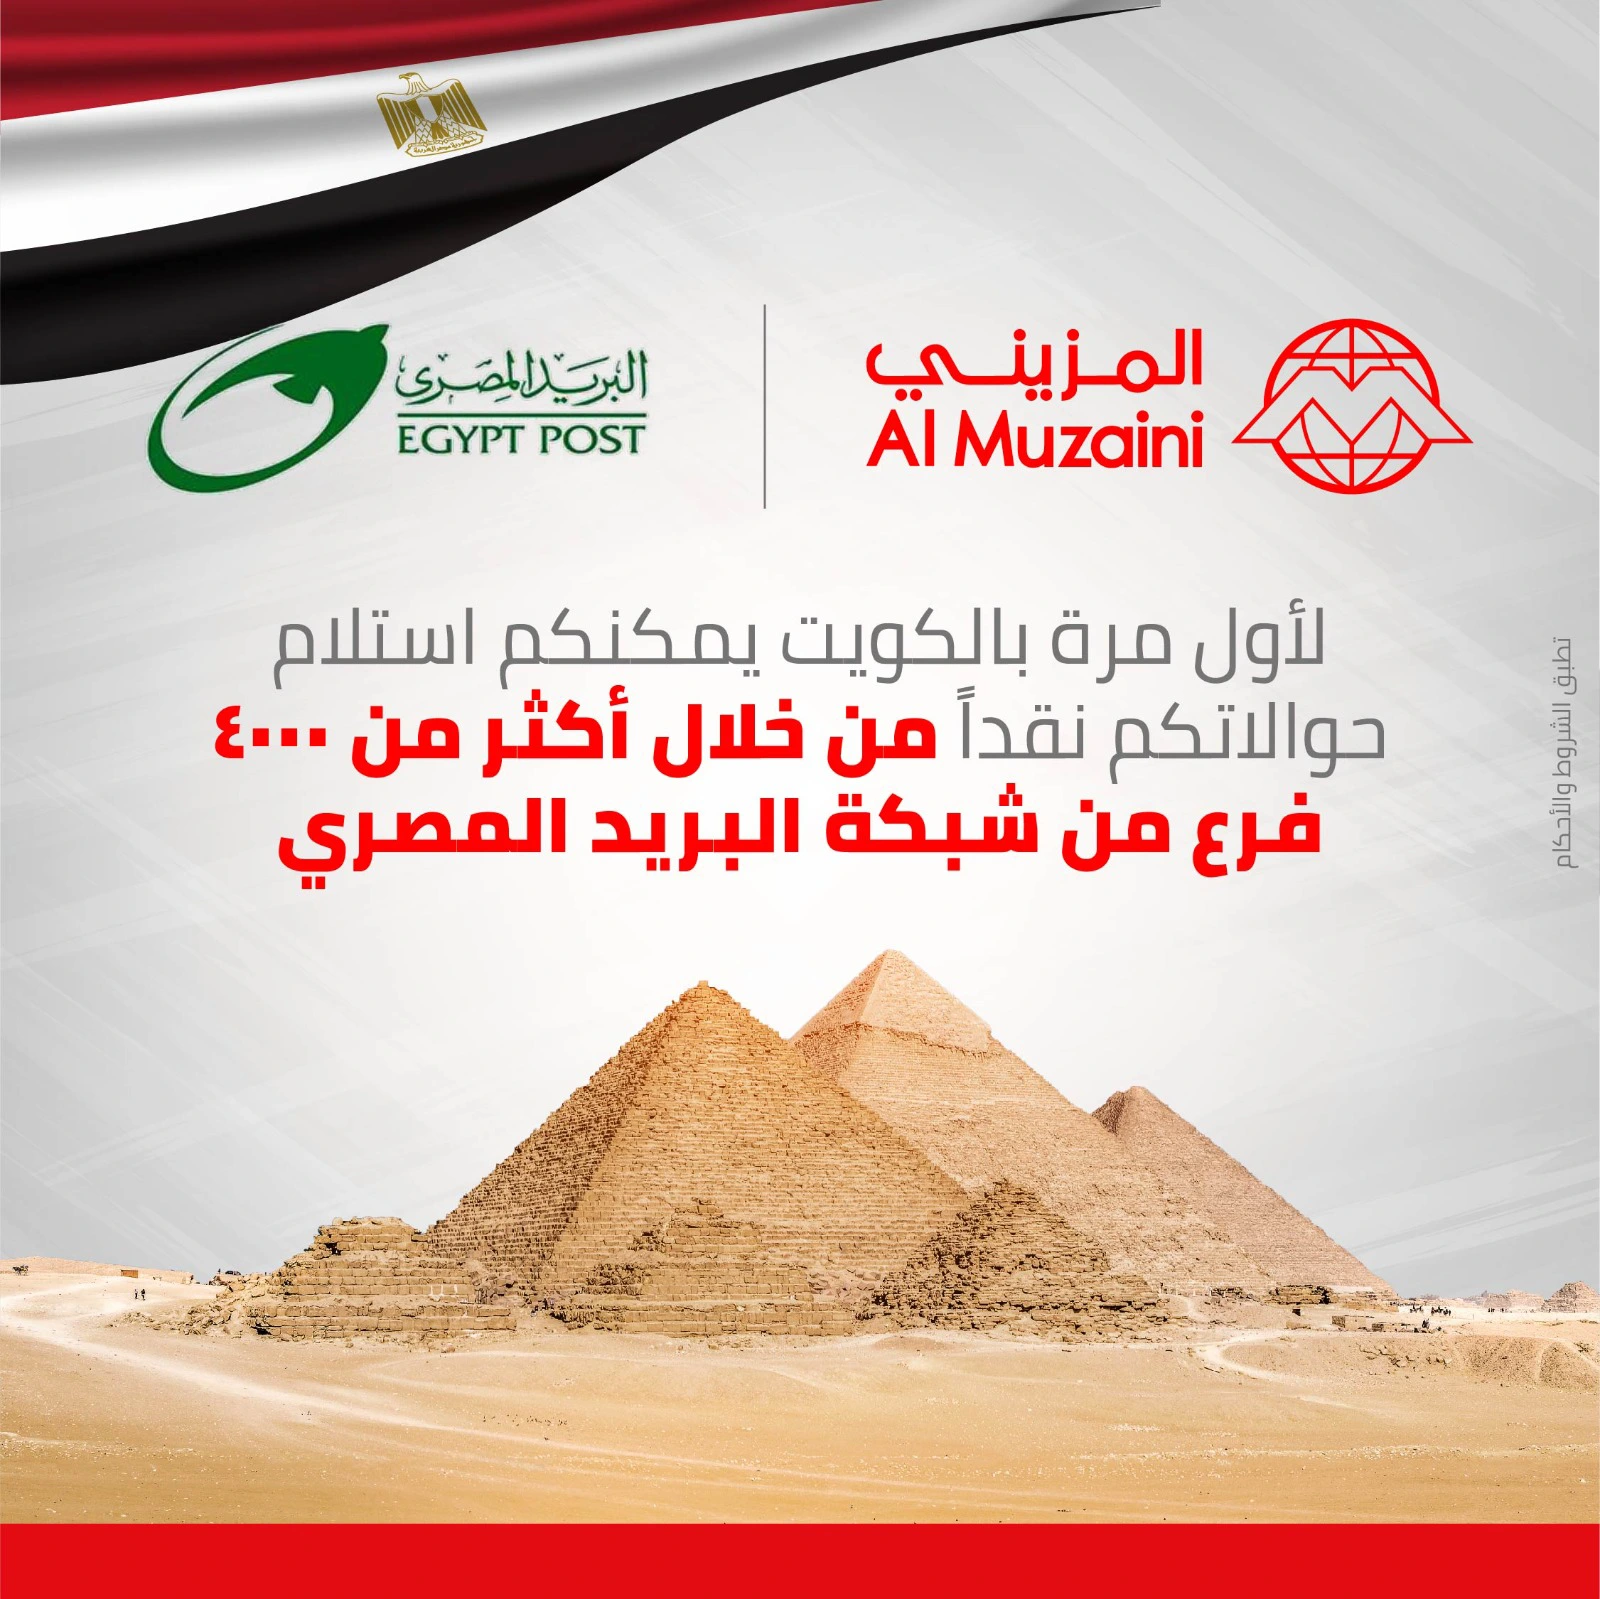 Receive cash transfers in Egypt through Egypt Post